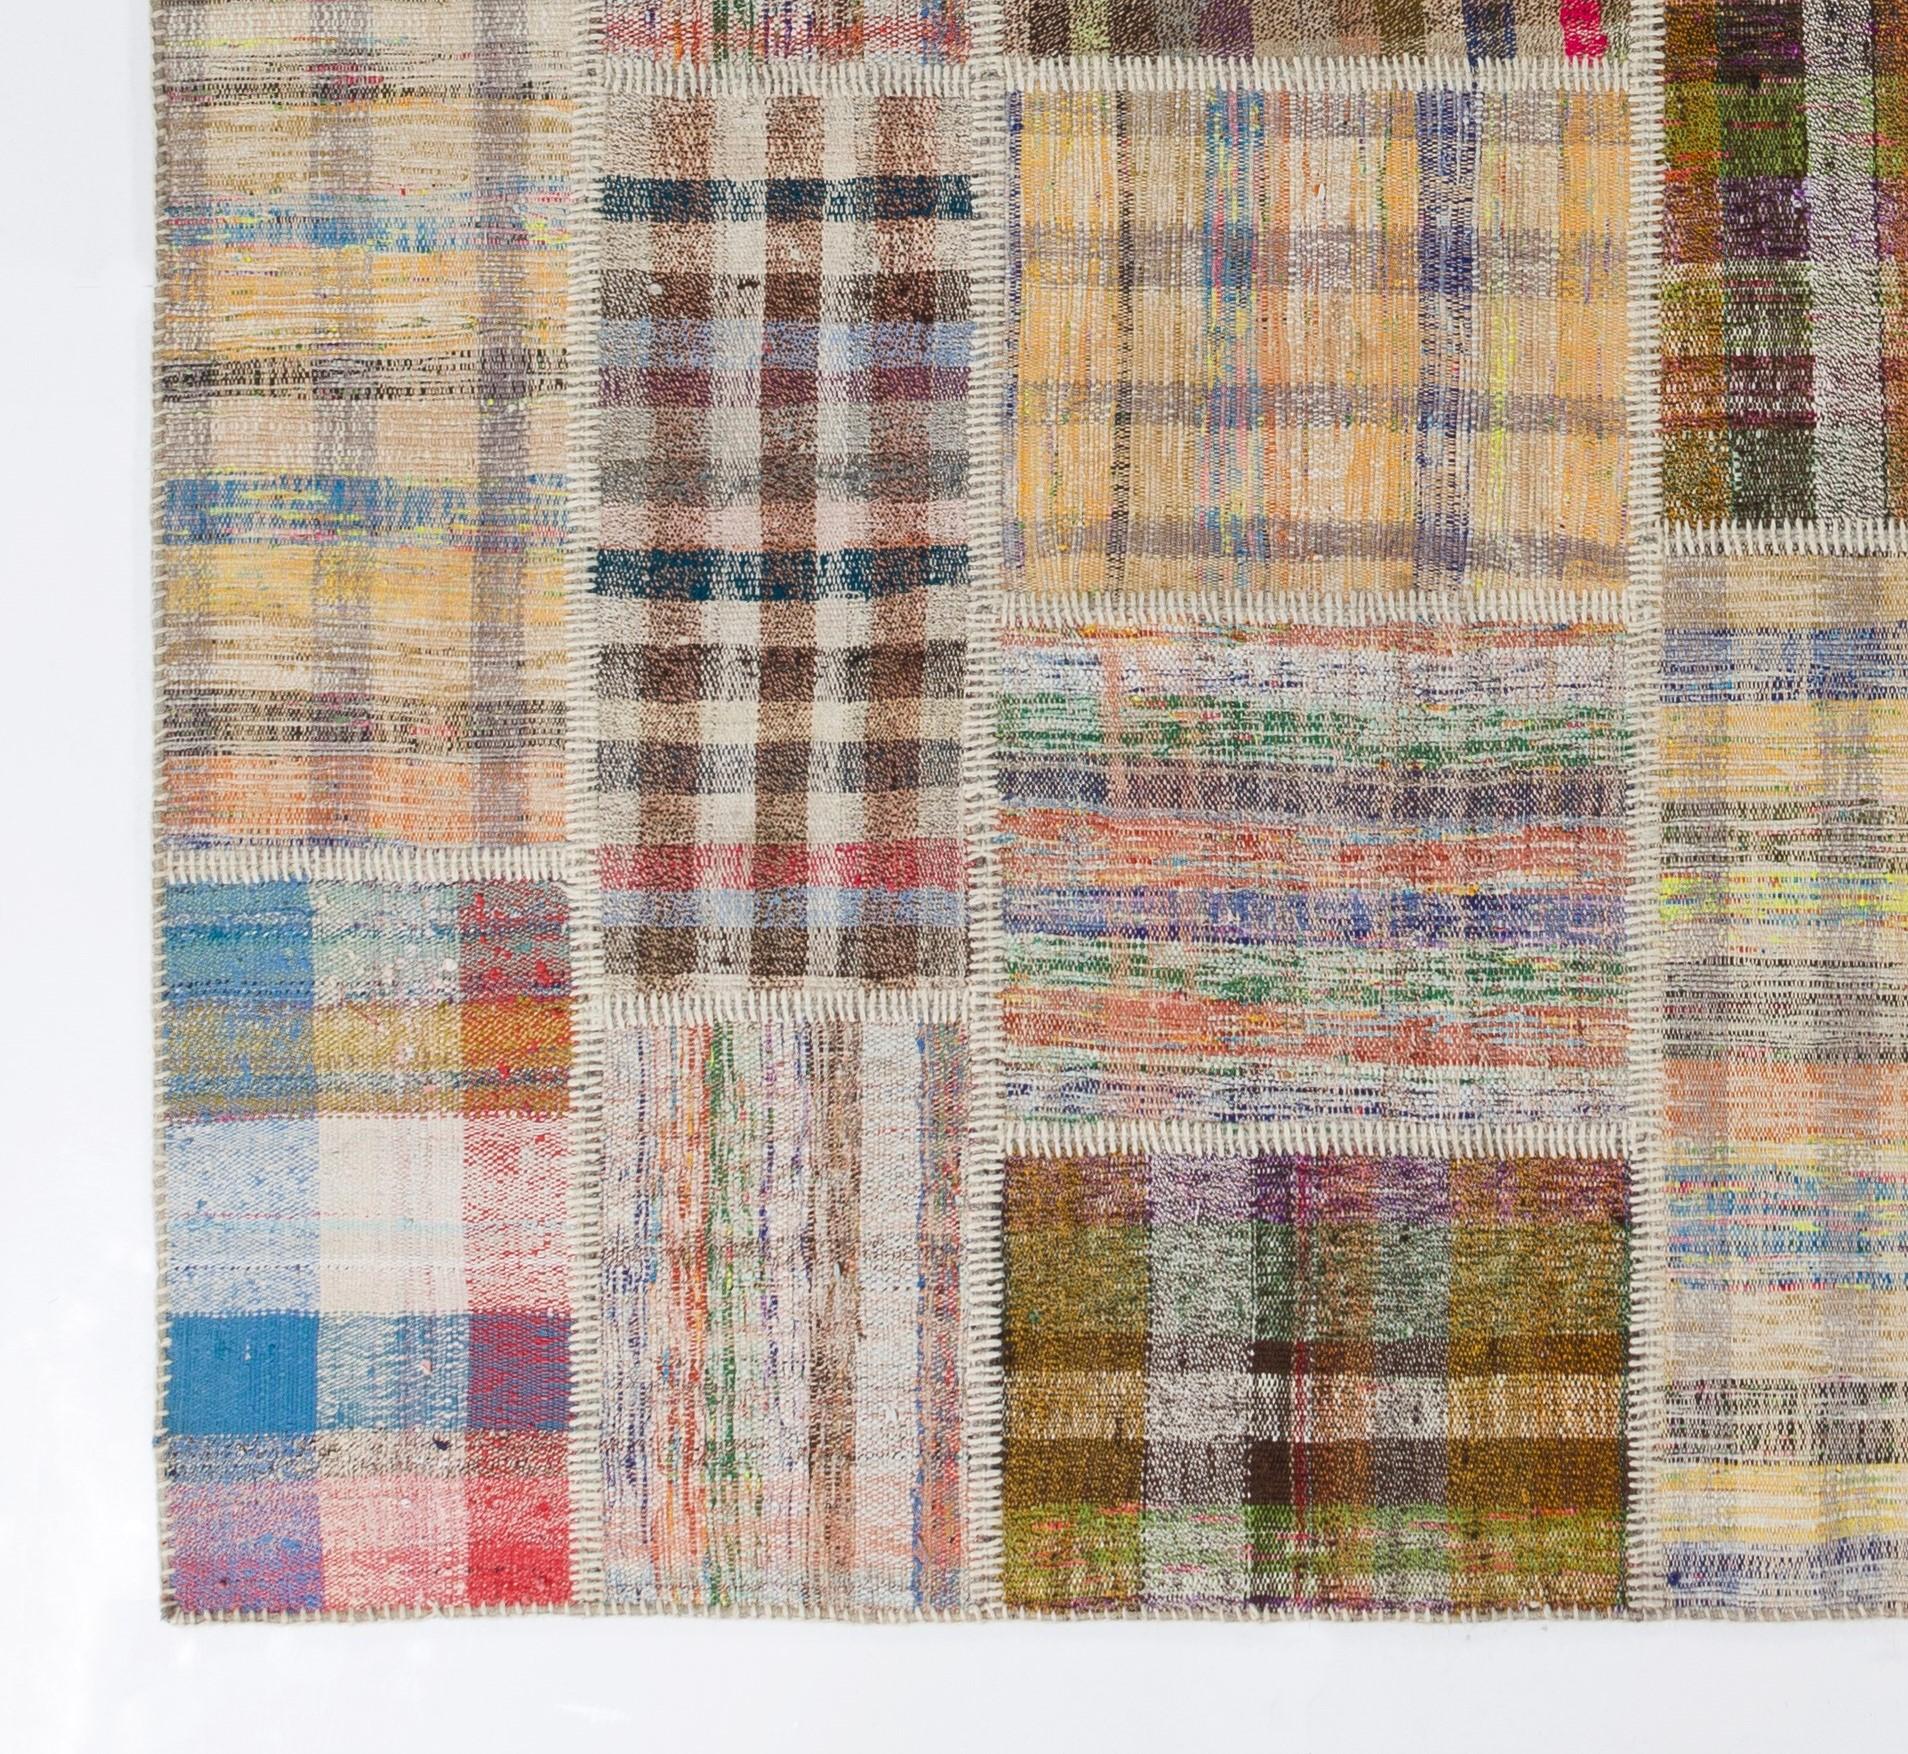 Hand-Woven 6.7x10 Ft Handwoven Vintage Turkish Kilims Re-Imagined, Custom Patchwork Rug For Sale